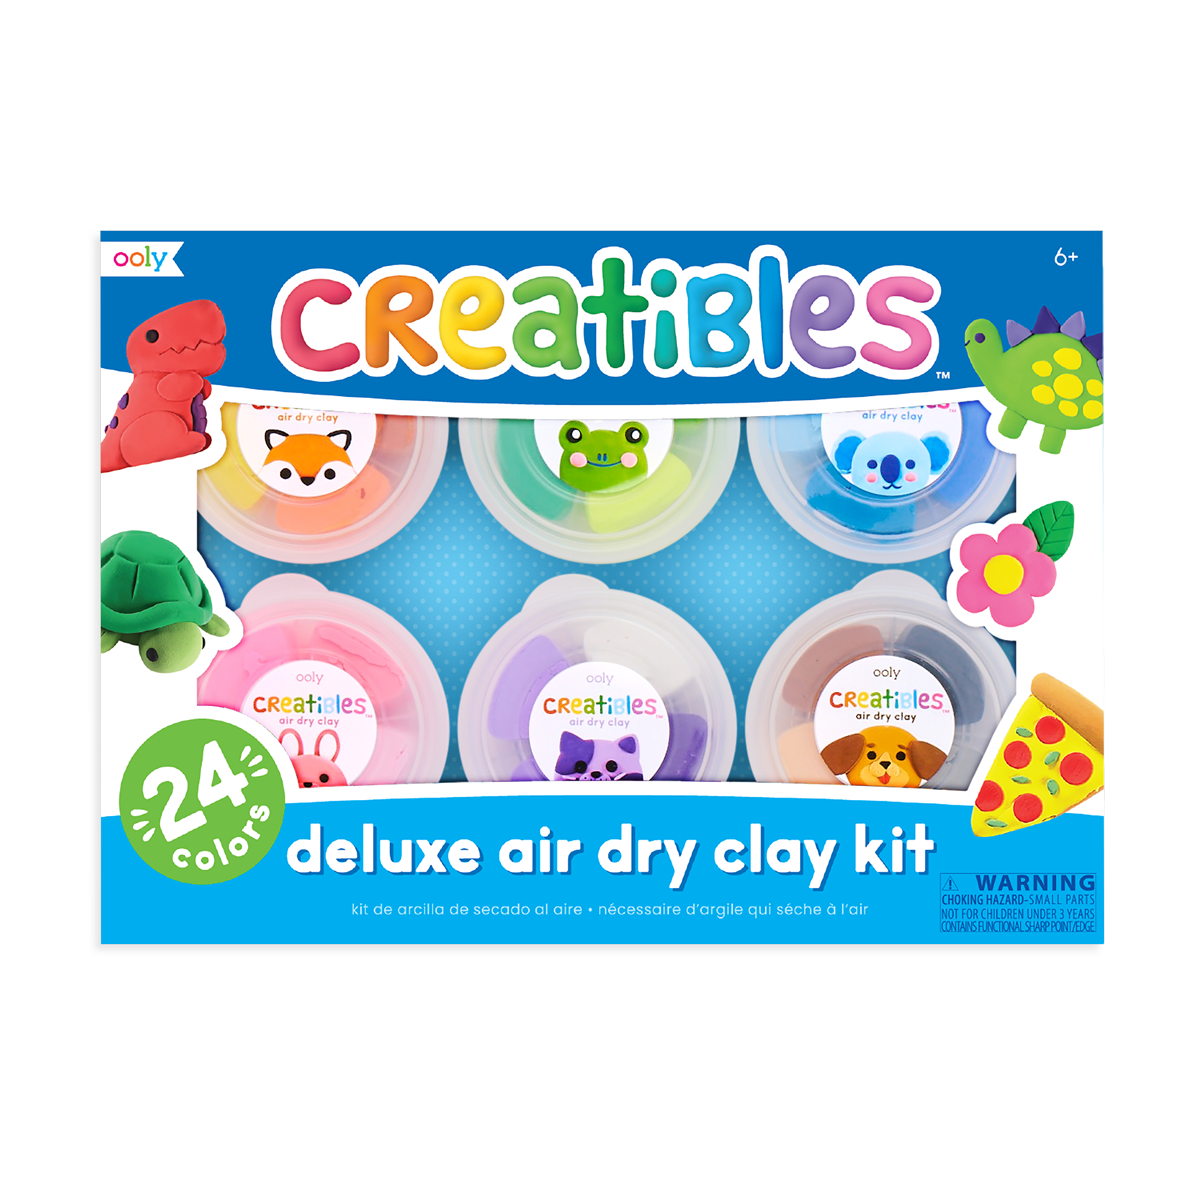 OOLY Creatibles D.I.Y. Air Dry Clay Kit in packaging